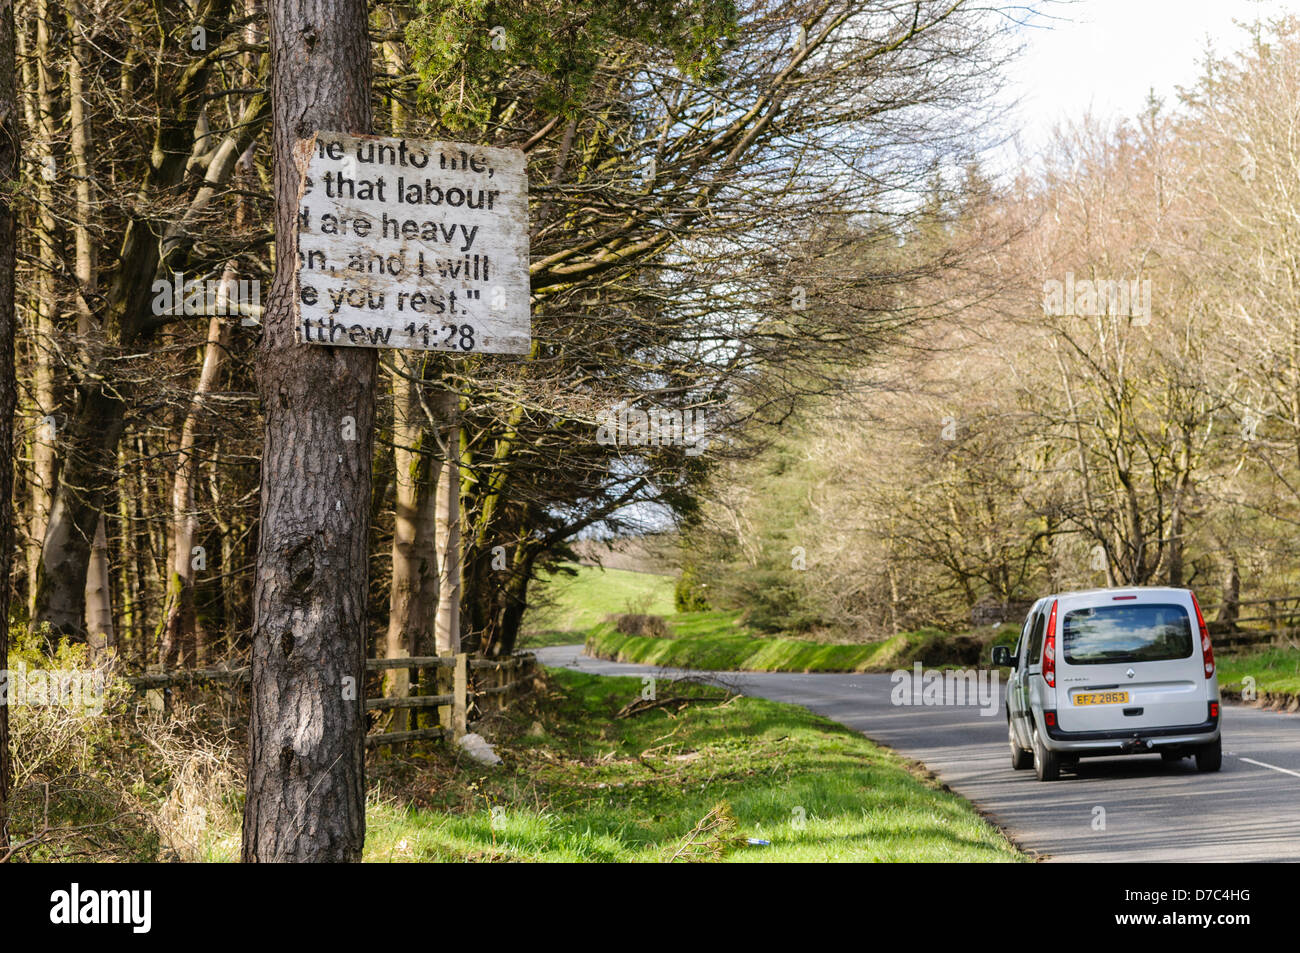 Religious sign typical of many erected in rural Protestant areas of Northern Ireland. Stock Photo